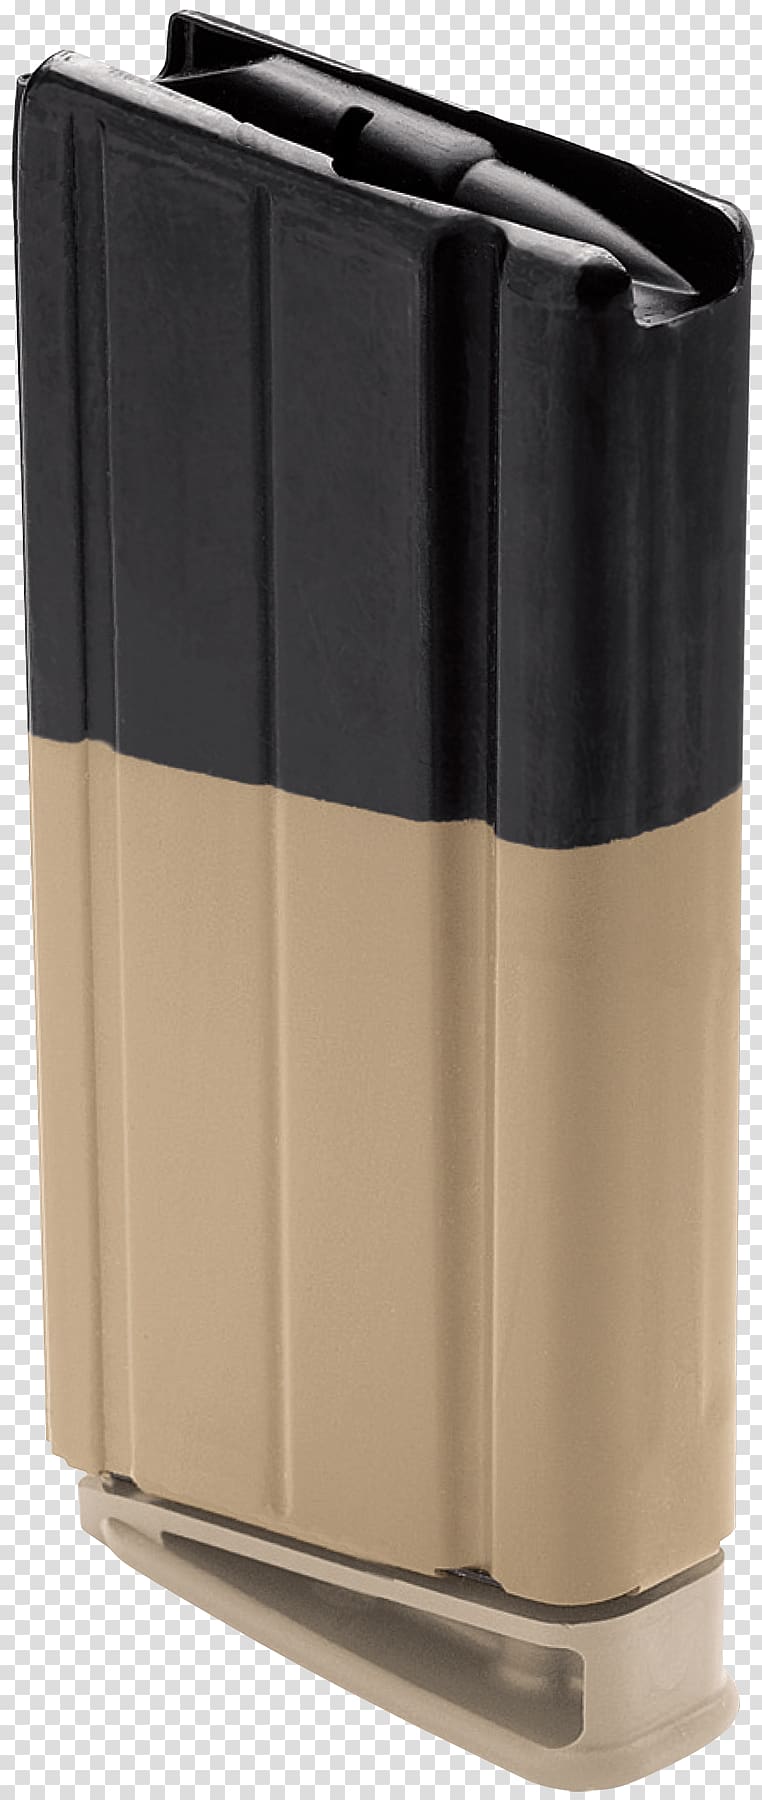 Firearm FN SCAR Magazine .308 Winchester FN Herstal, Fn Mag transparent background PNG clipart